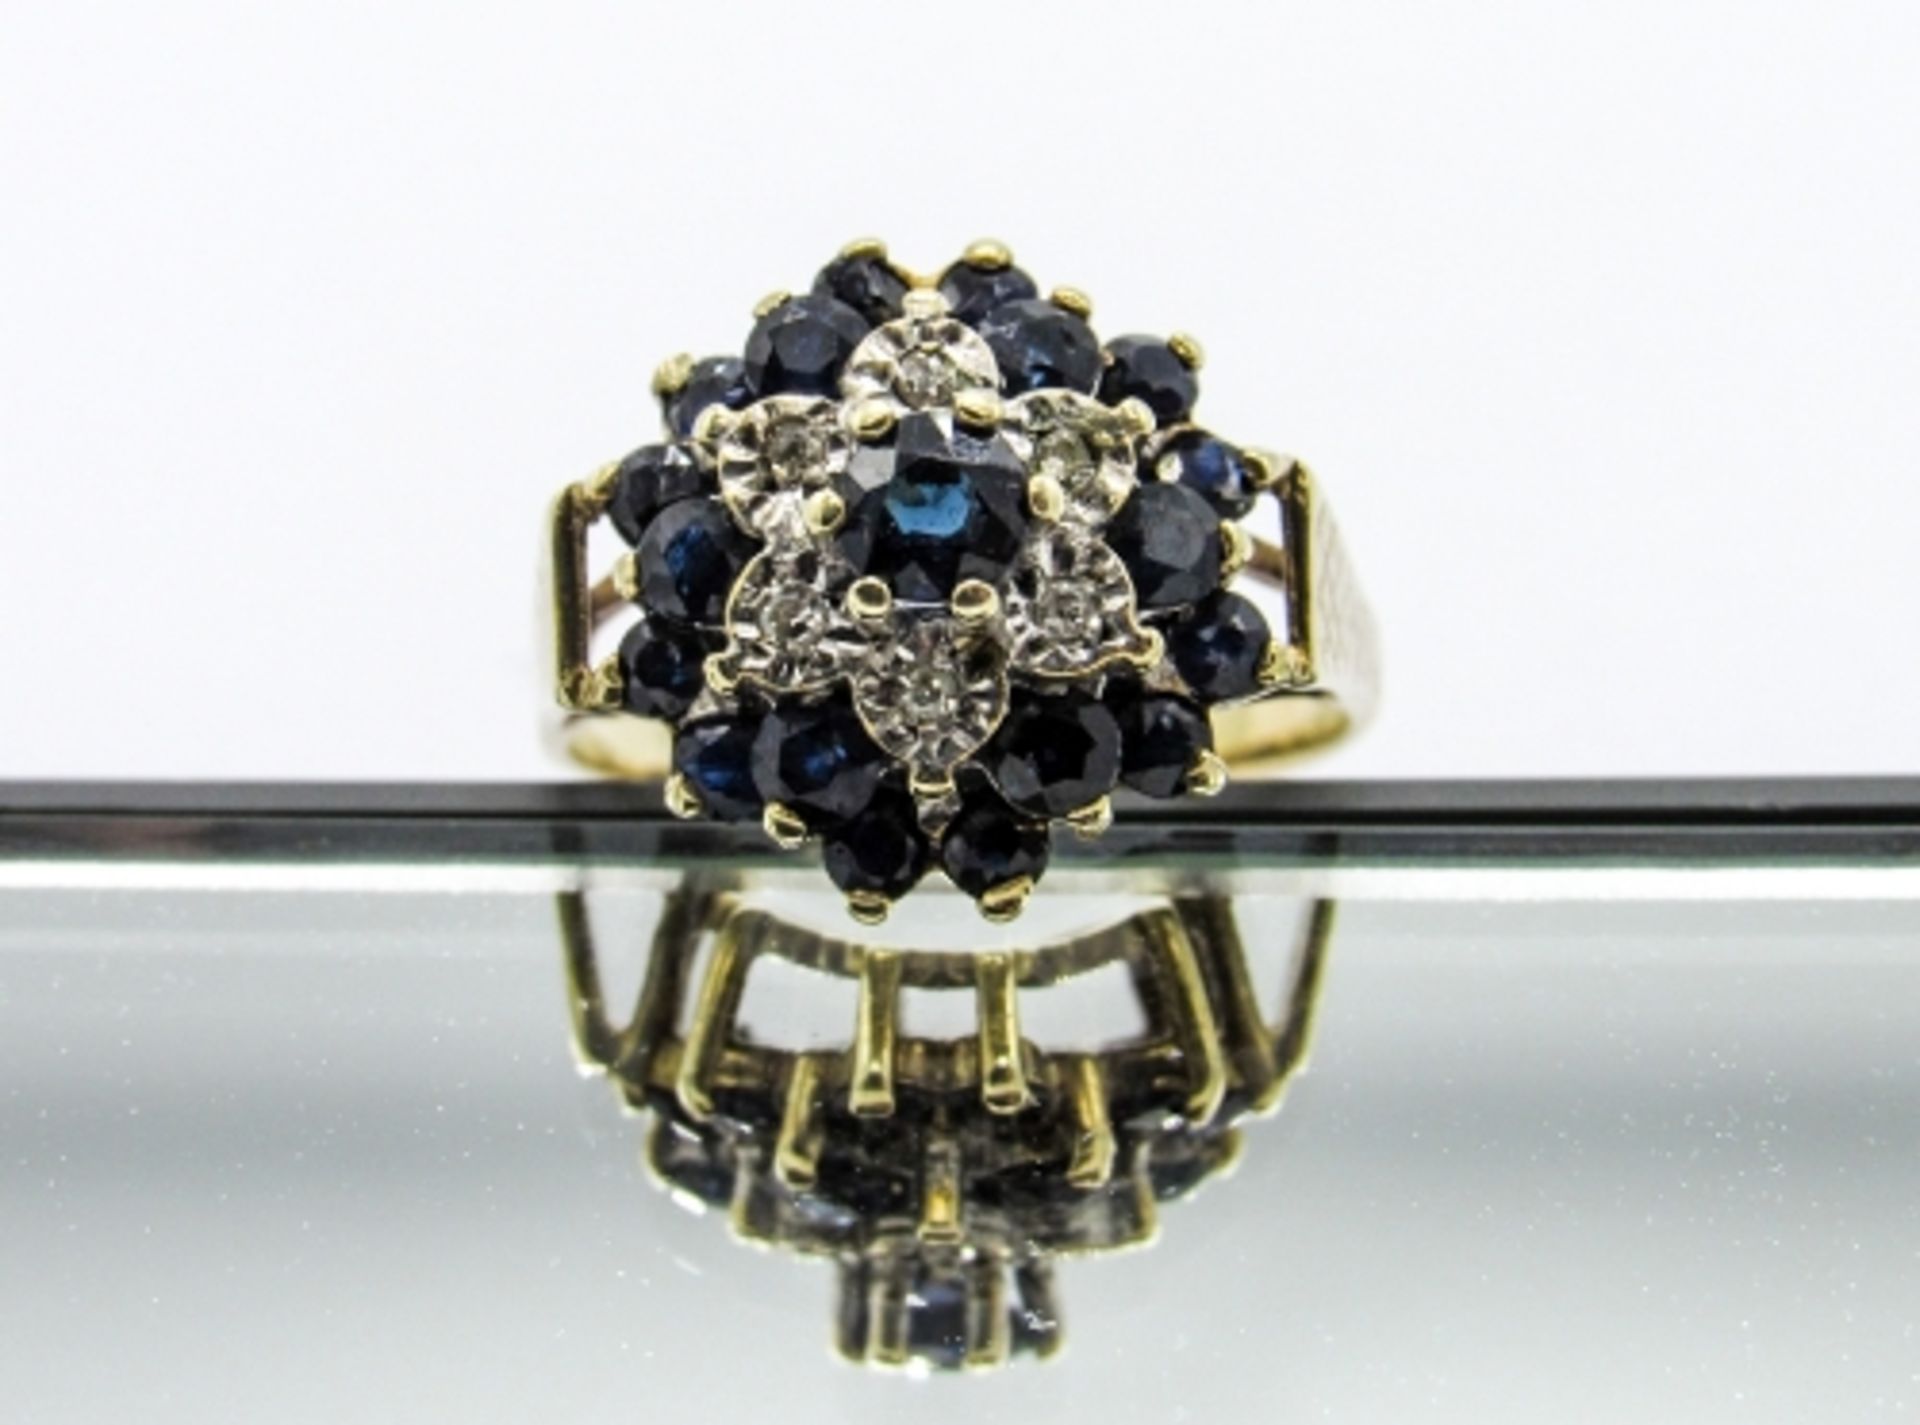 9ct gold sapphire & diamond ring, weight 3.7gms, size M. Estimate £130-150 - Image 4 of 4